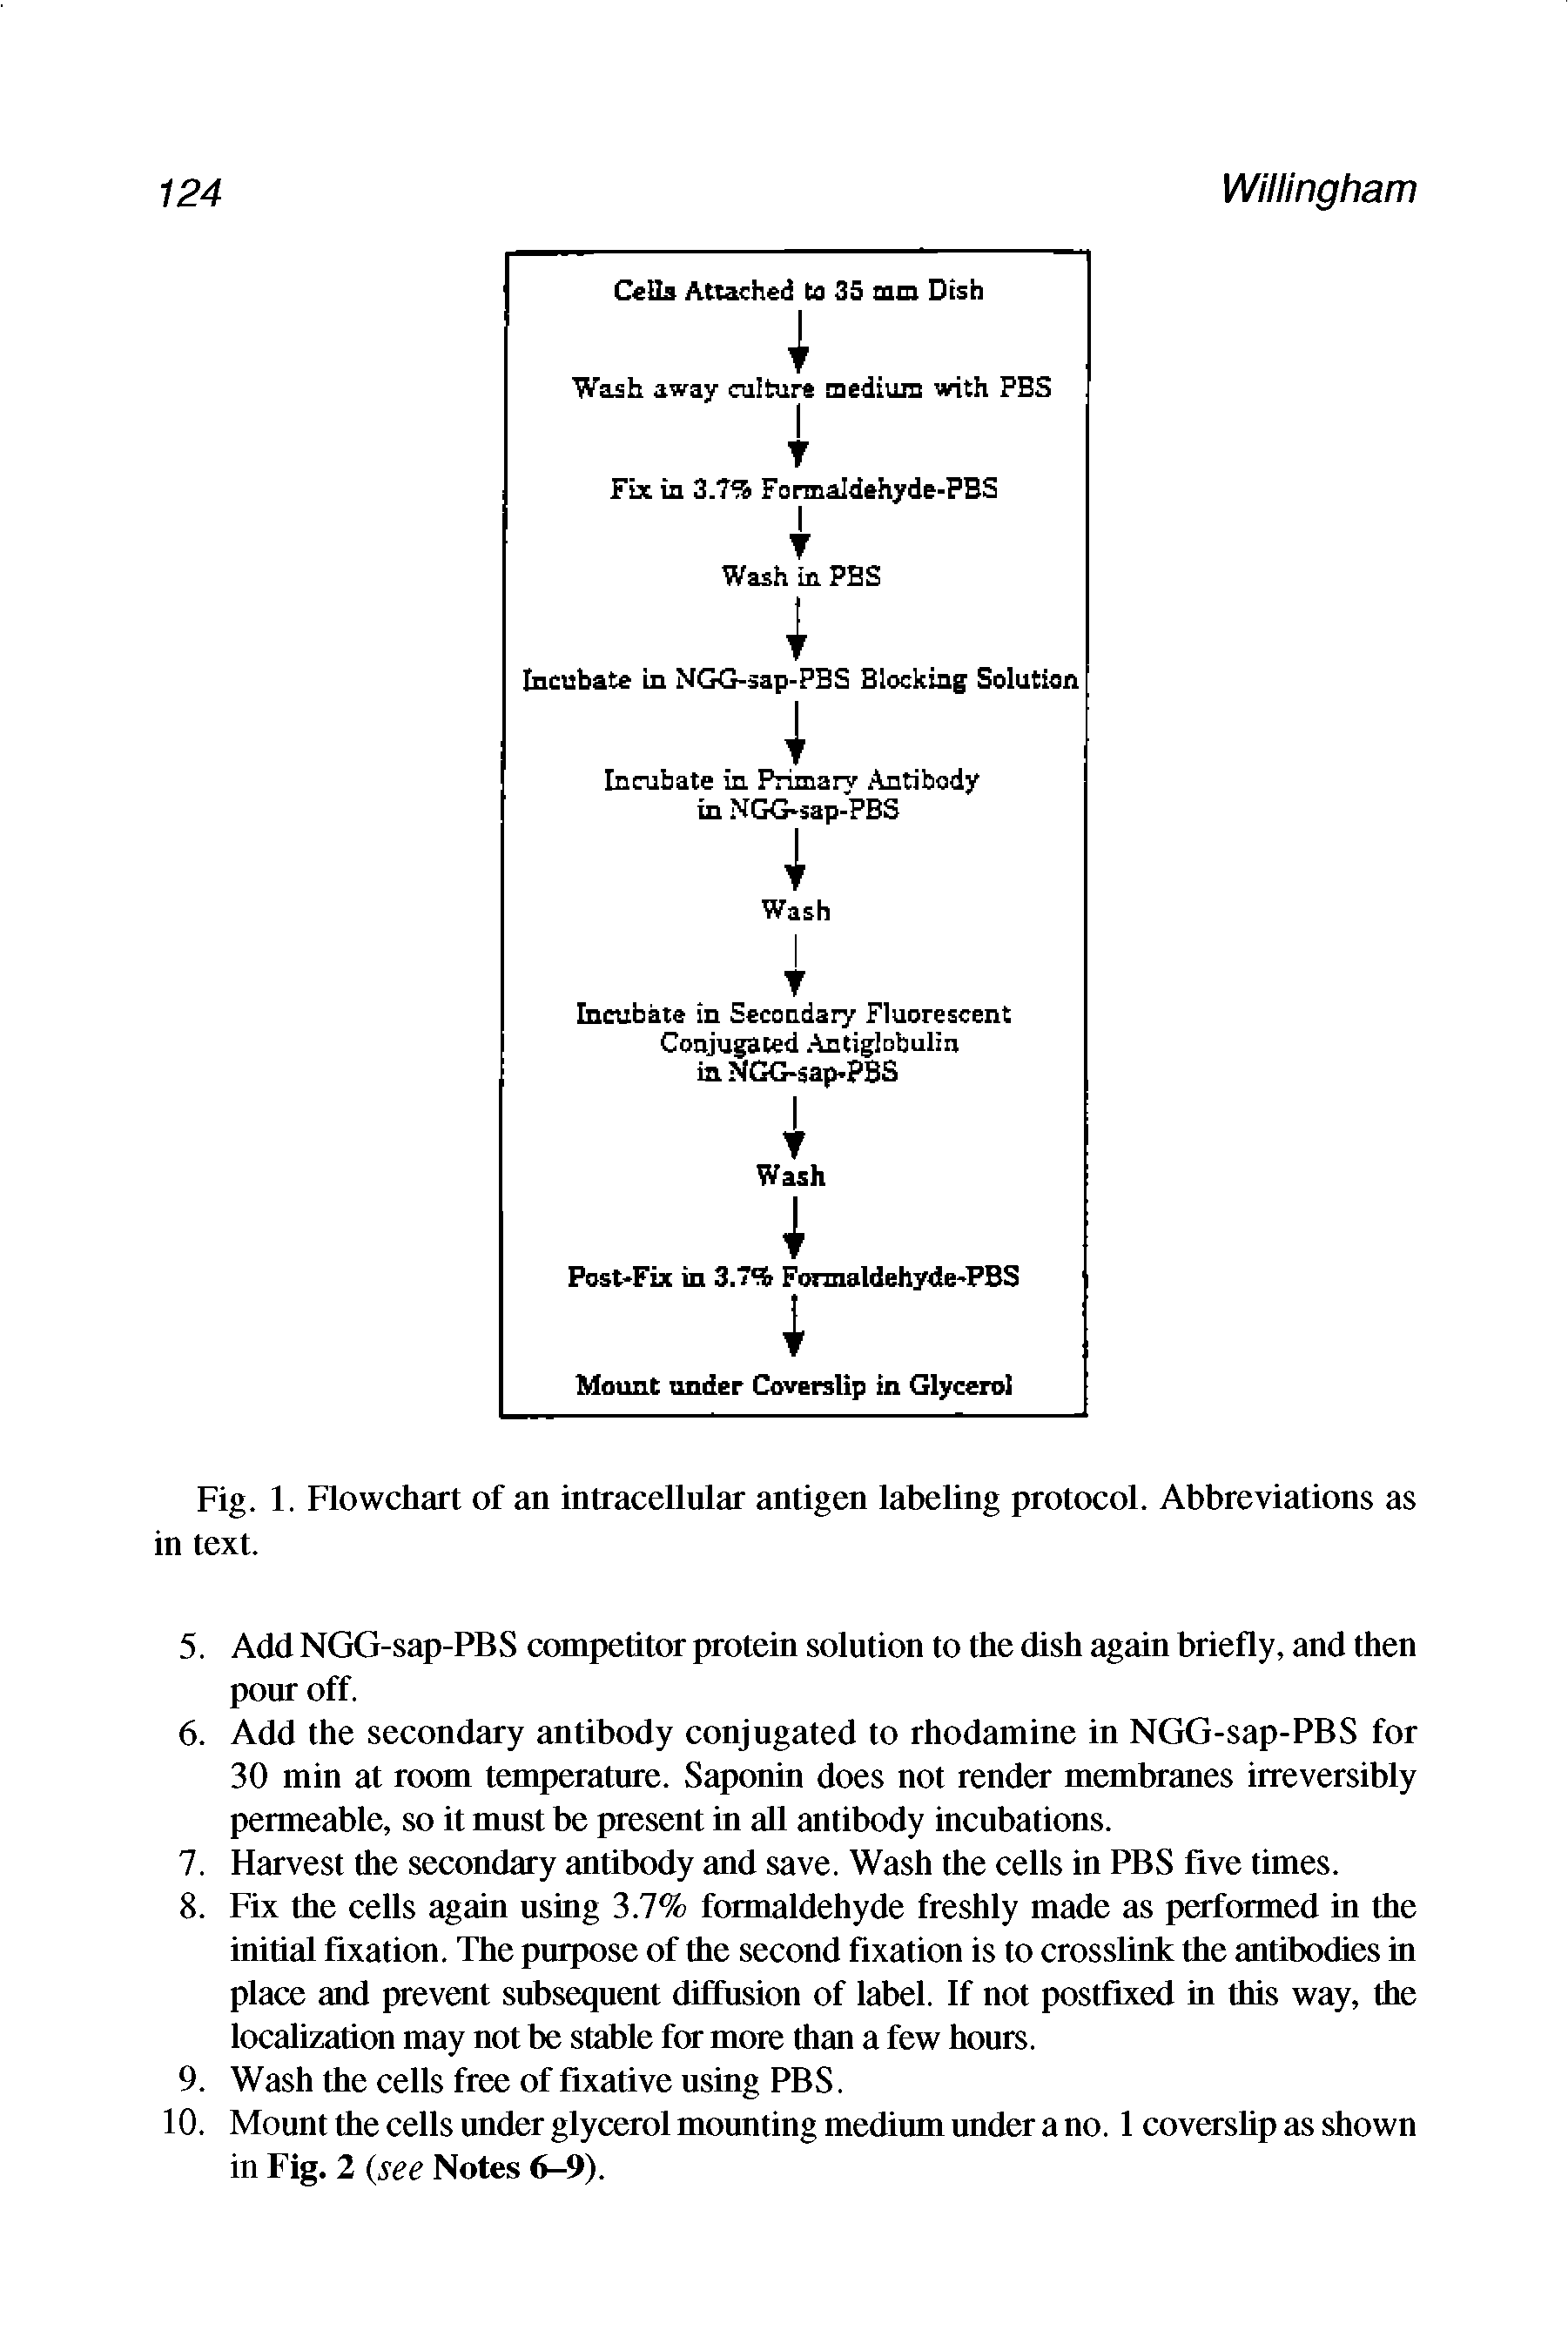 Fig. 1. Flowchart of an intracellular antigen labeling protocol. Abbreviations as in text.